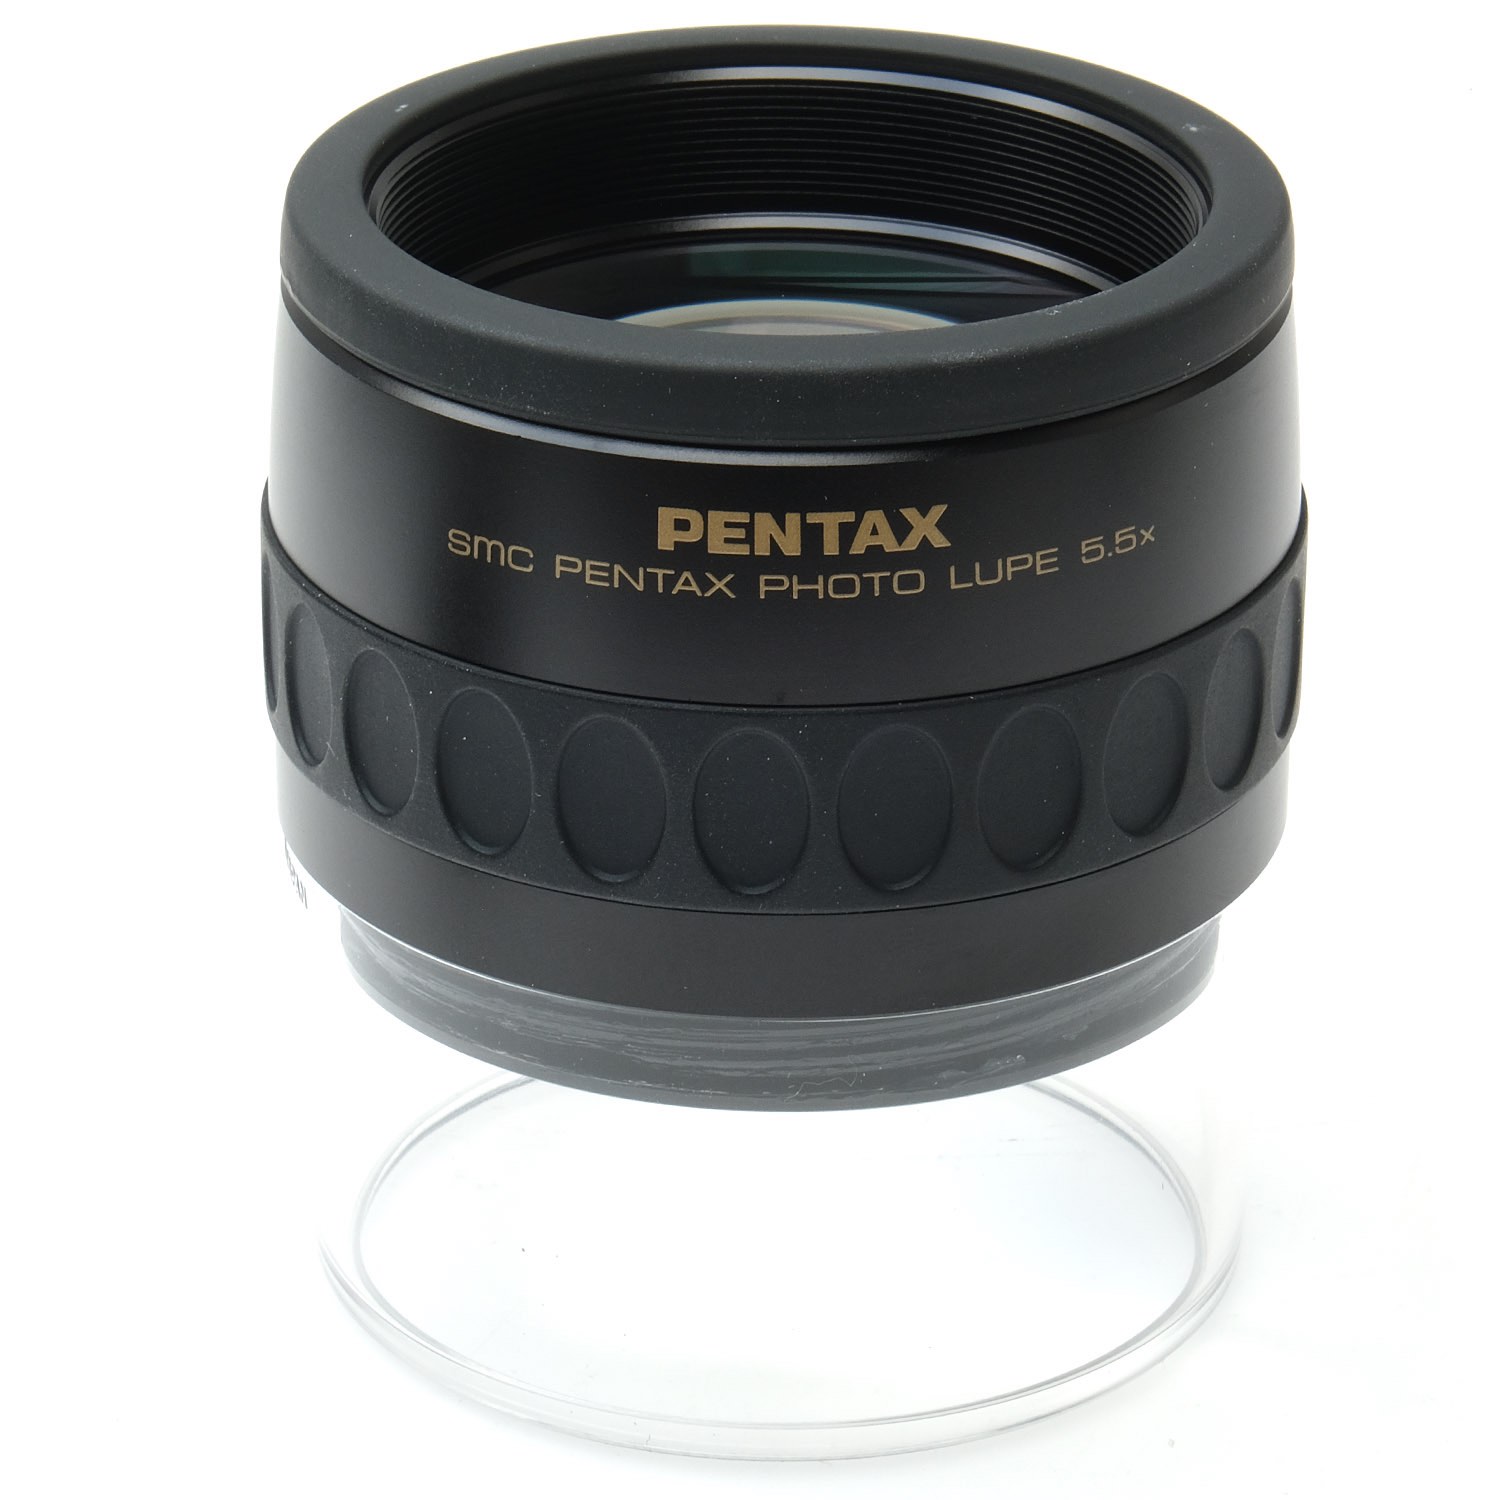 Pentax 5.5x Lupe, Boxed (9+)